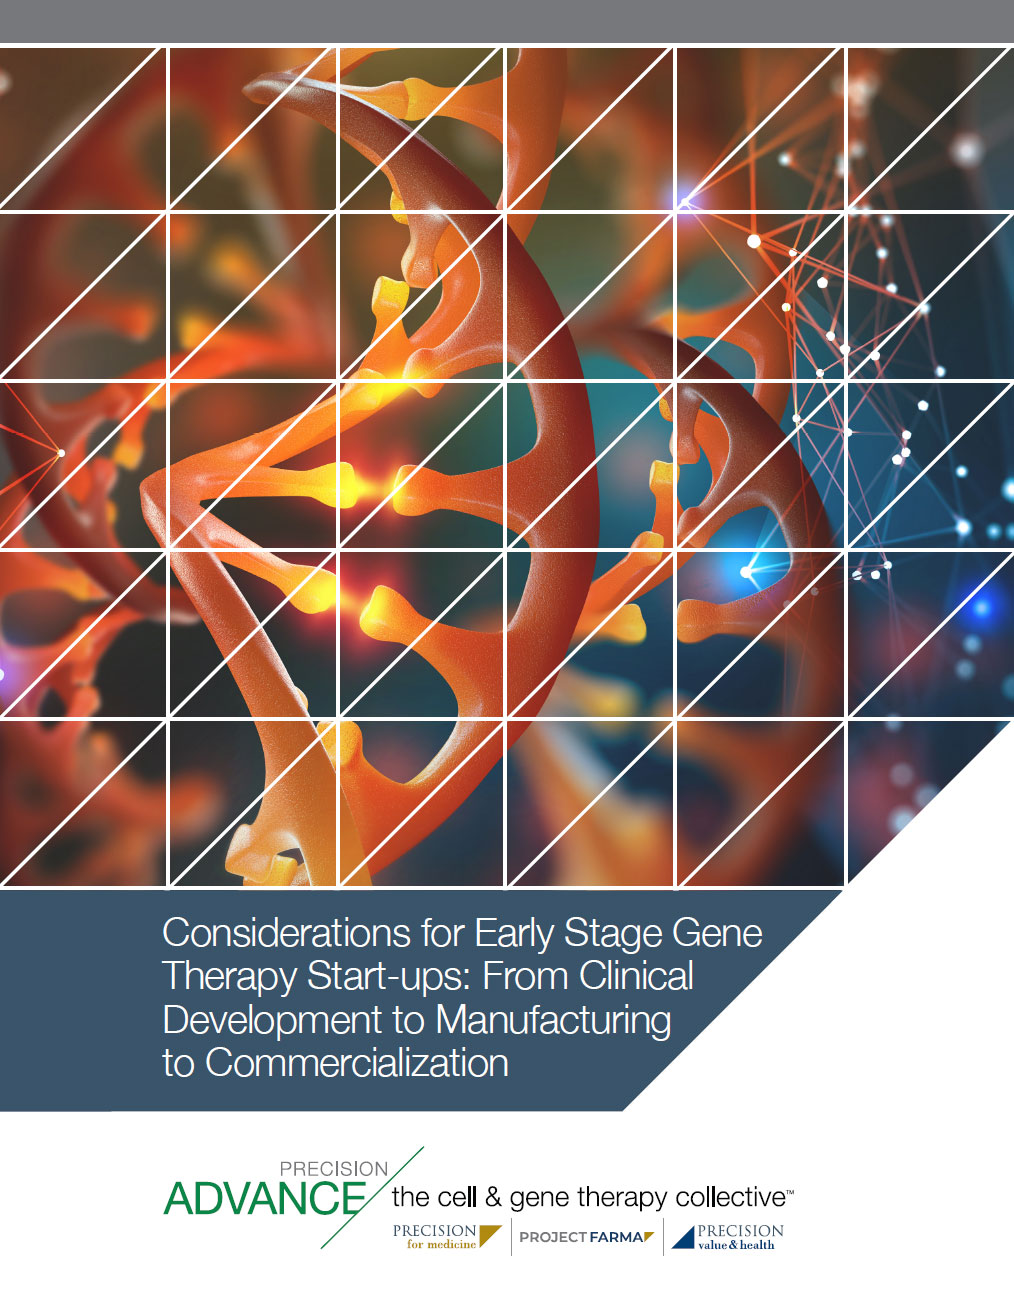 Considerations for Early-Stage Gene Therapy Start-ups white paper thumbnail